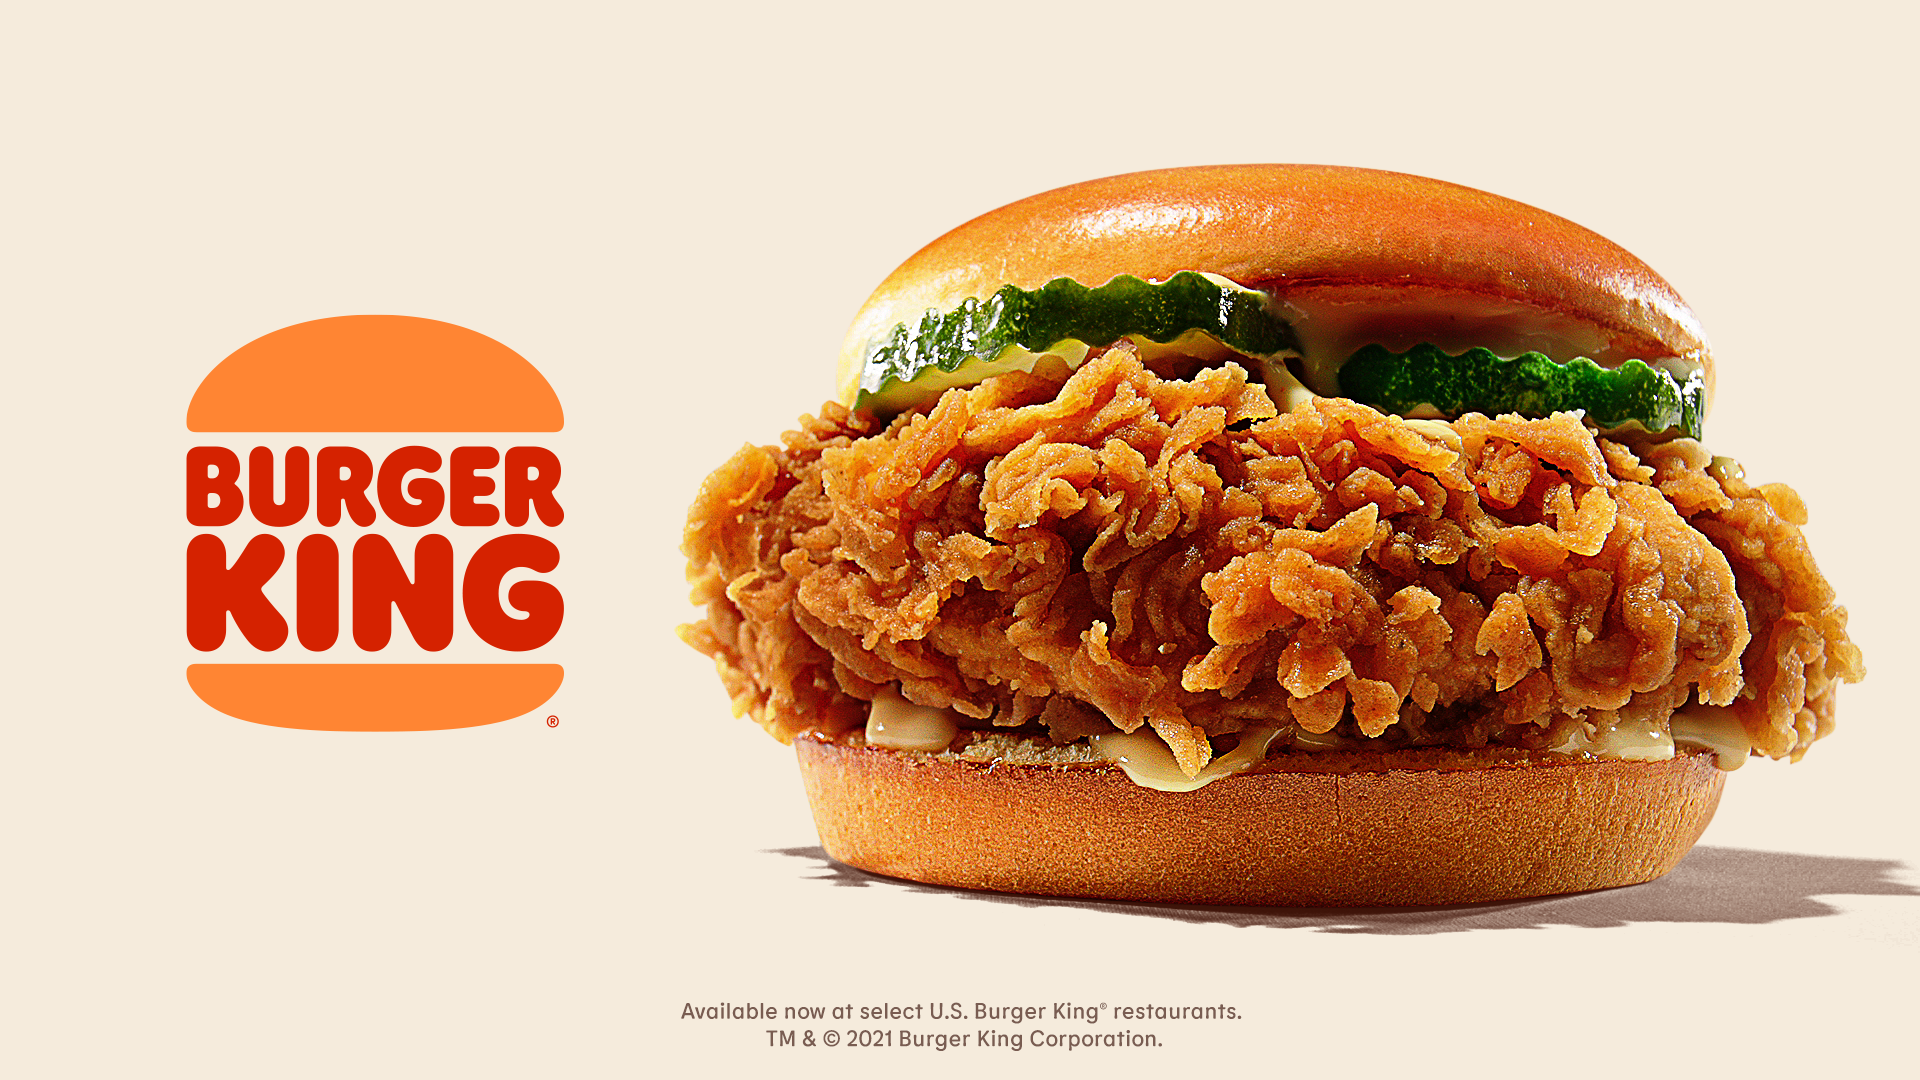 The Crispiest Chicken Sandwich you've EVER had!